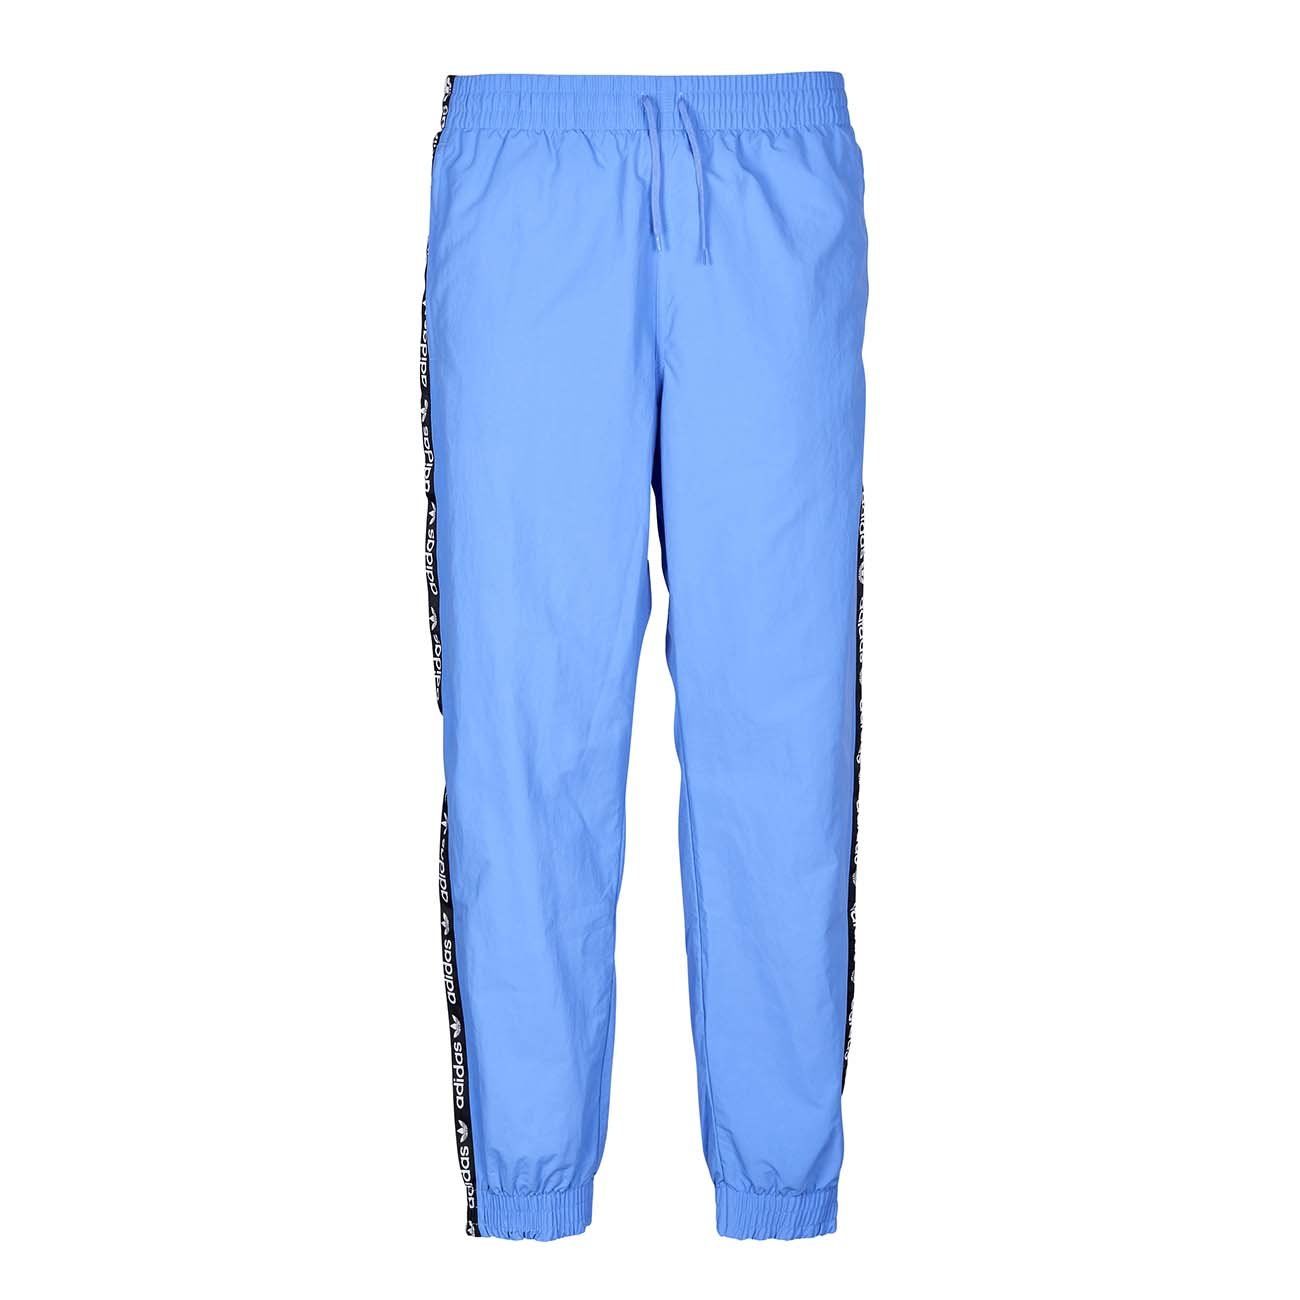 VOCAL D WIND TRACK PANTS WITH TAPE LOGO BANDS Man Real blue